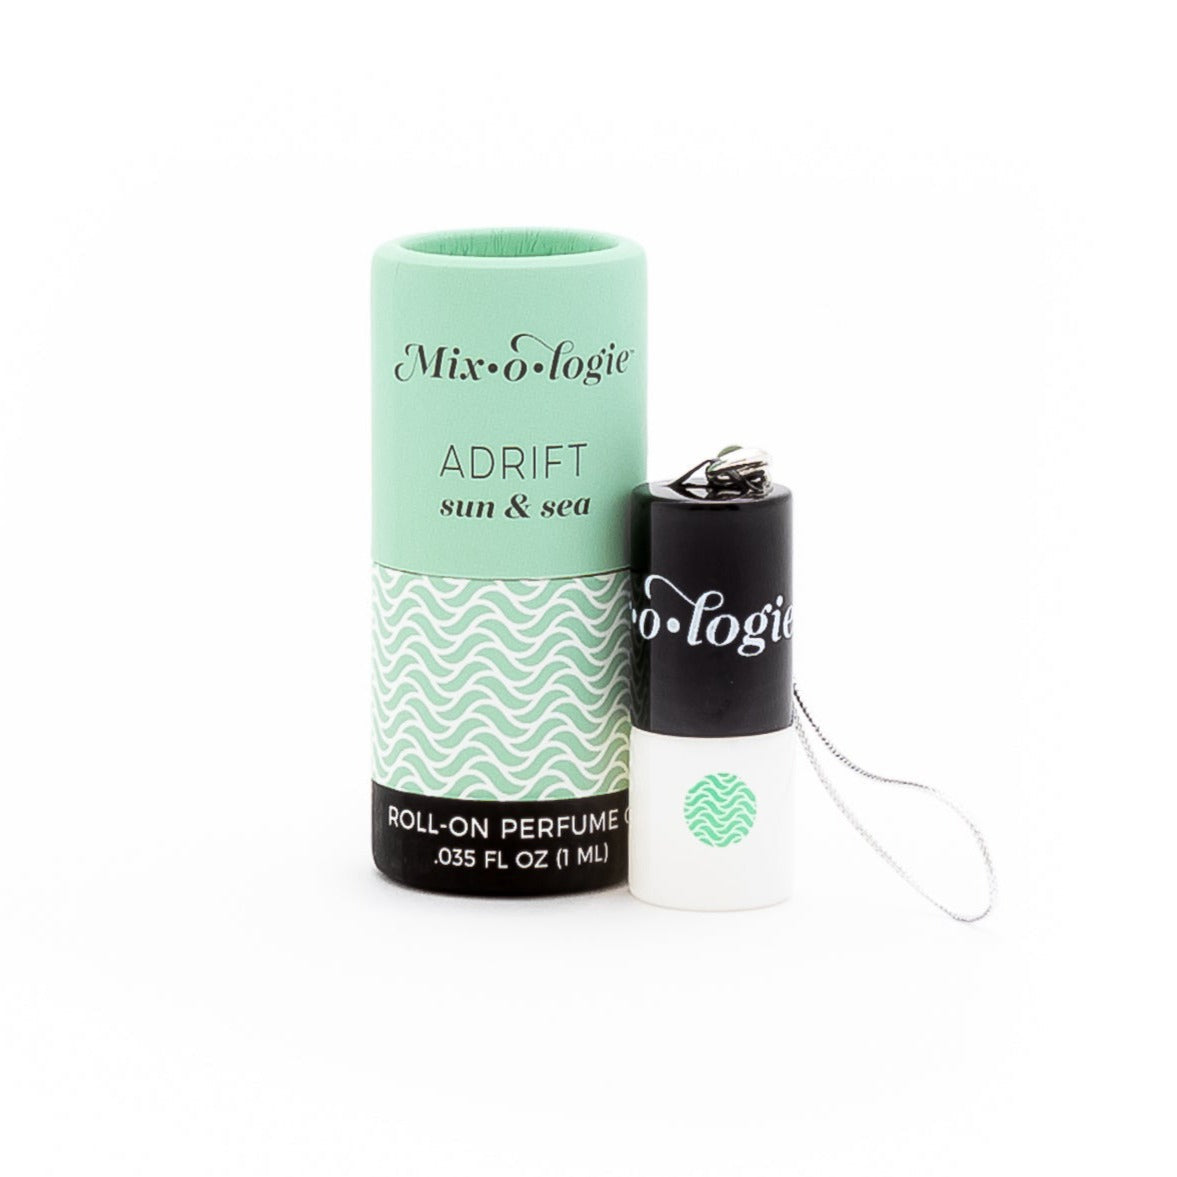 Adrift (Sun & Sea) mini white cylinder rollerballs with black top and keychain attachment with light green Adrift pattern has .035 fl oz or 1 mL. Light green cylinder packing tube. Mini rollerball and cylinder tube are on a white background